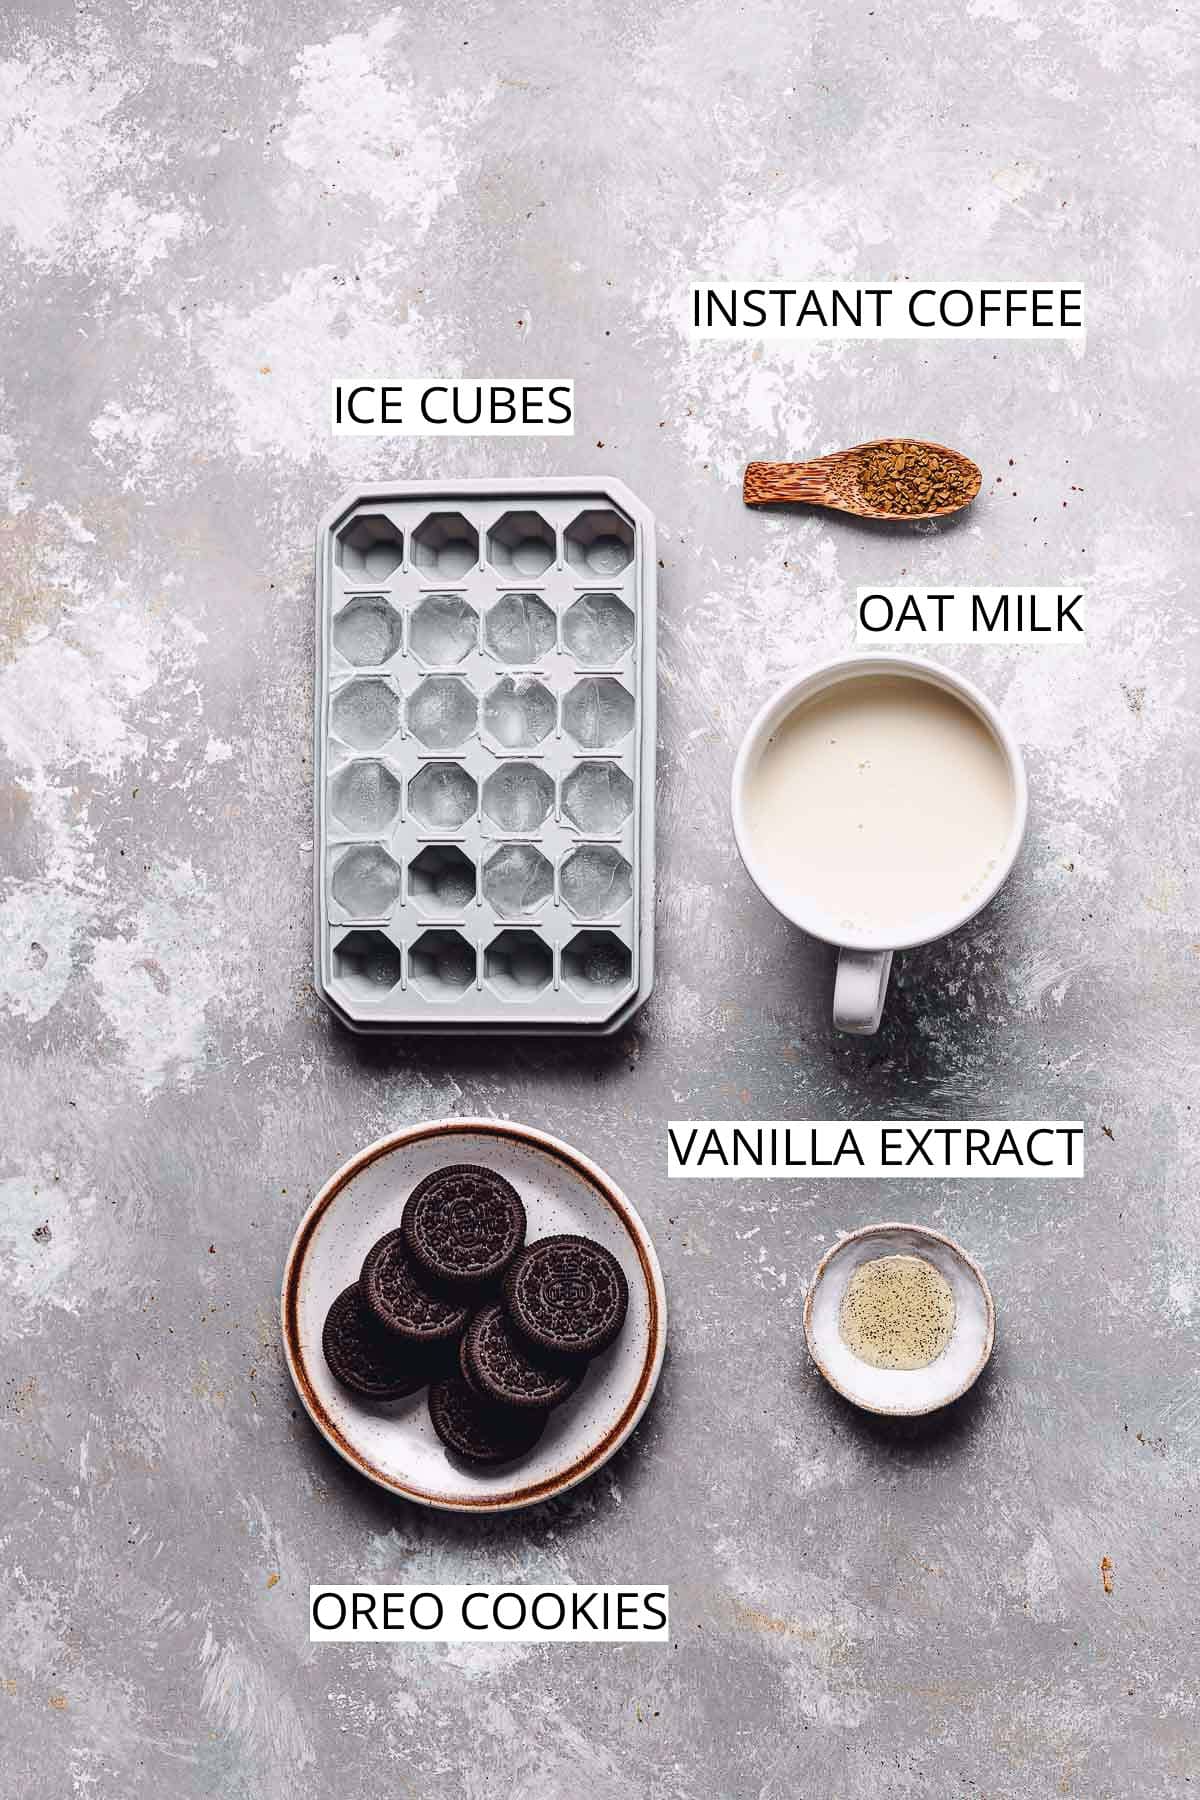 Ice cubes, instant coffee, milk, vanilla, and Oreo cookies on a flat surface.